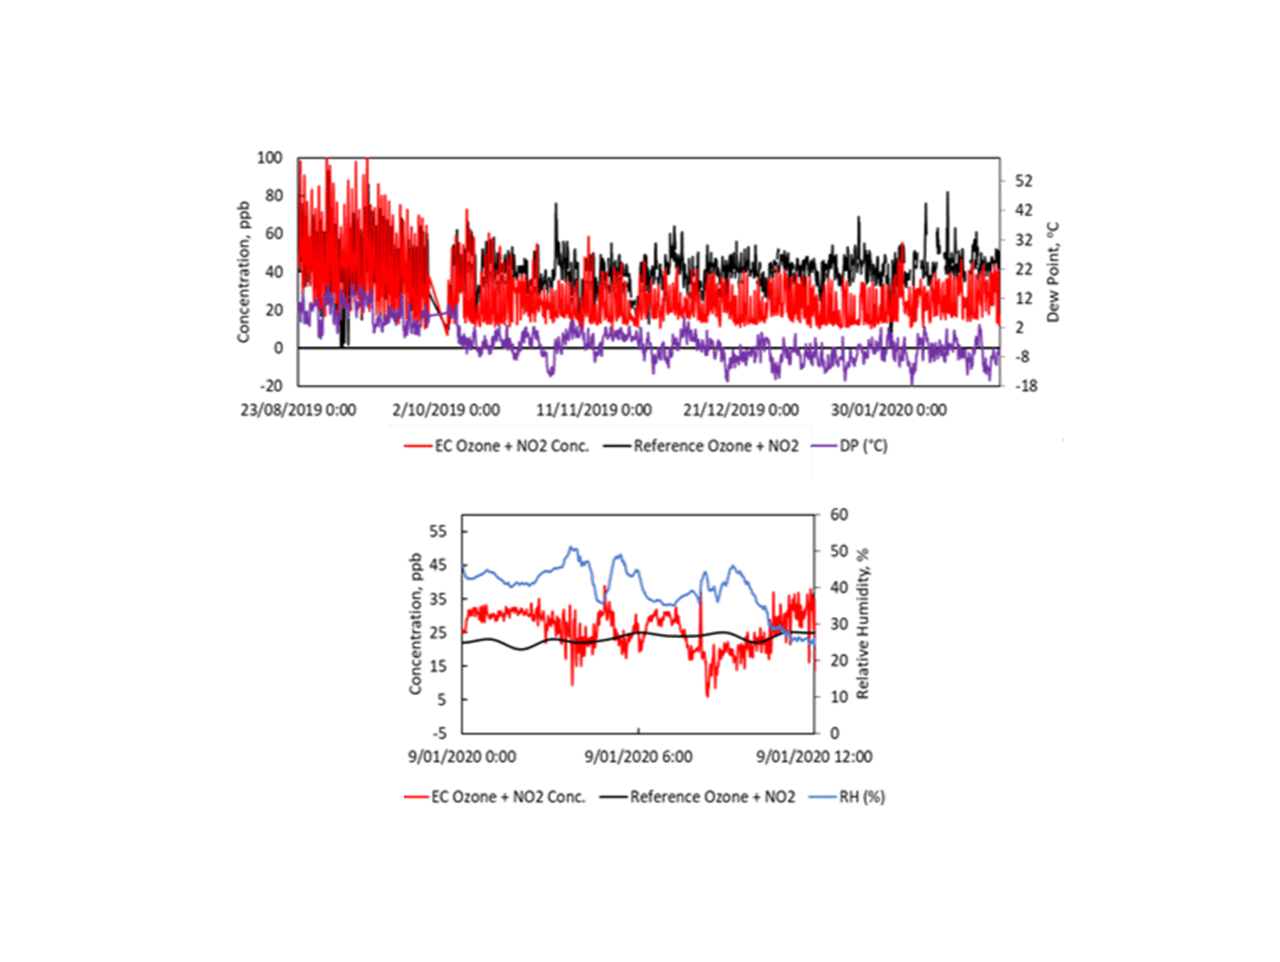 Results showing seasonal shifts in gas sensor readings during Denver, Colorado study, and the effect of a sudden change in relative humidity on gas sensor readings.